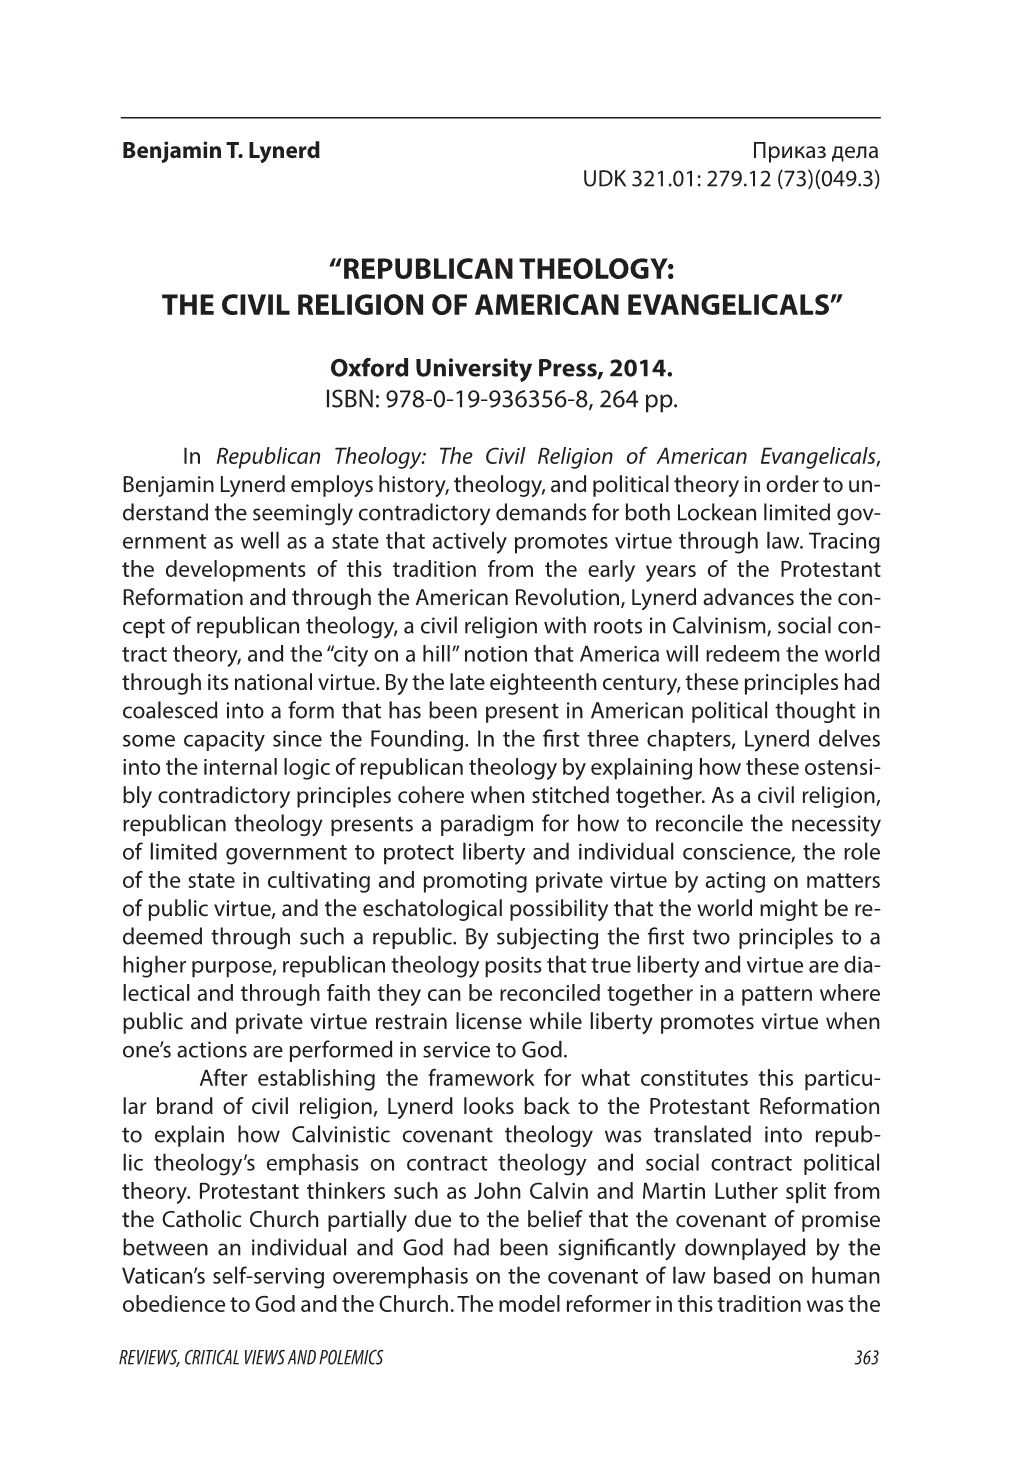 “Republican Theology: the Civil Religion of American Evangelicals”